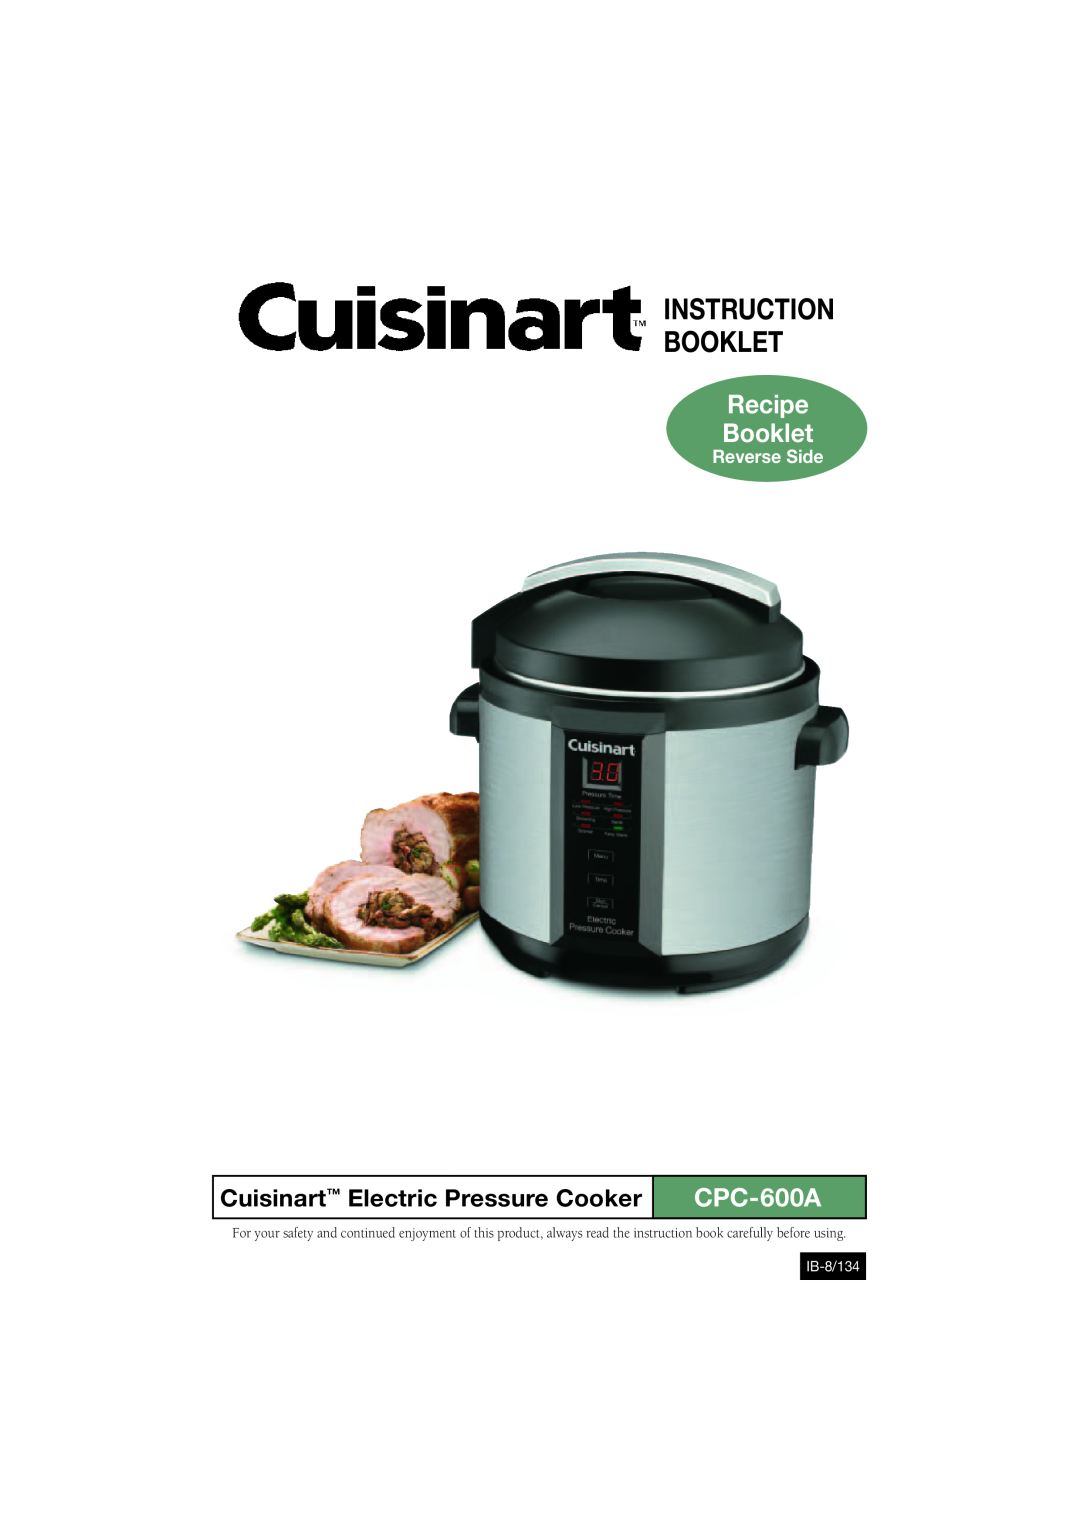 Cuisinart CPC-600A manual Instruction Booklet, Cuisinart Electric Pressure Cooker, Recipe Booklet, Reverse Side, IB-8/134 